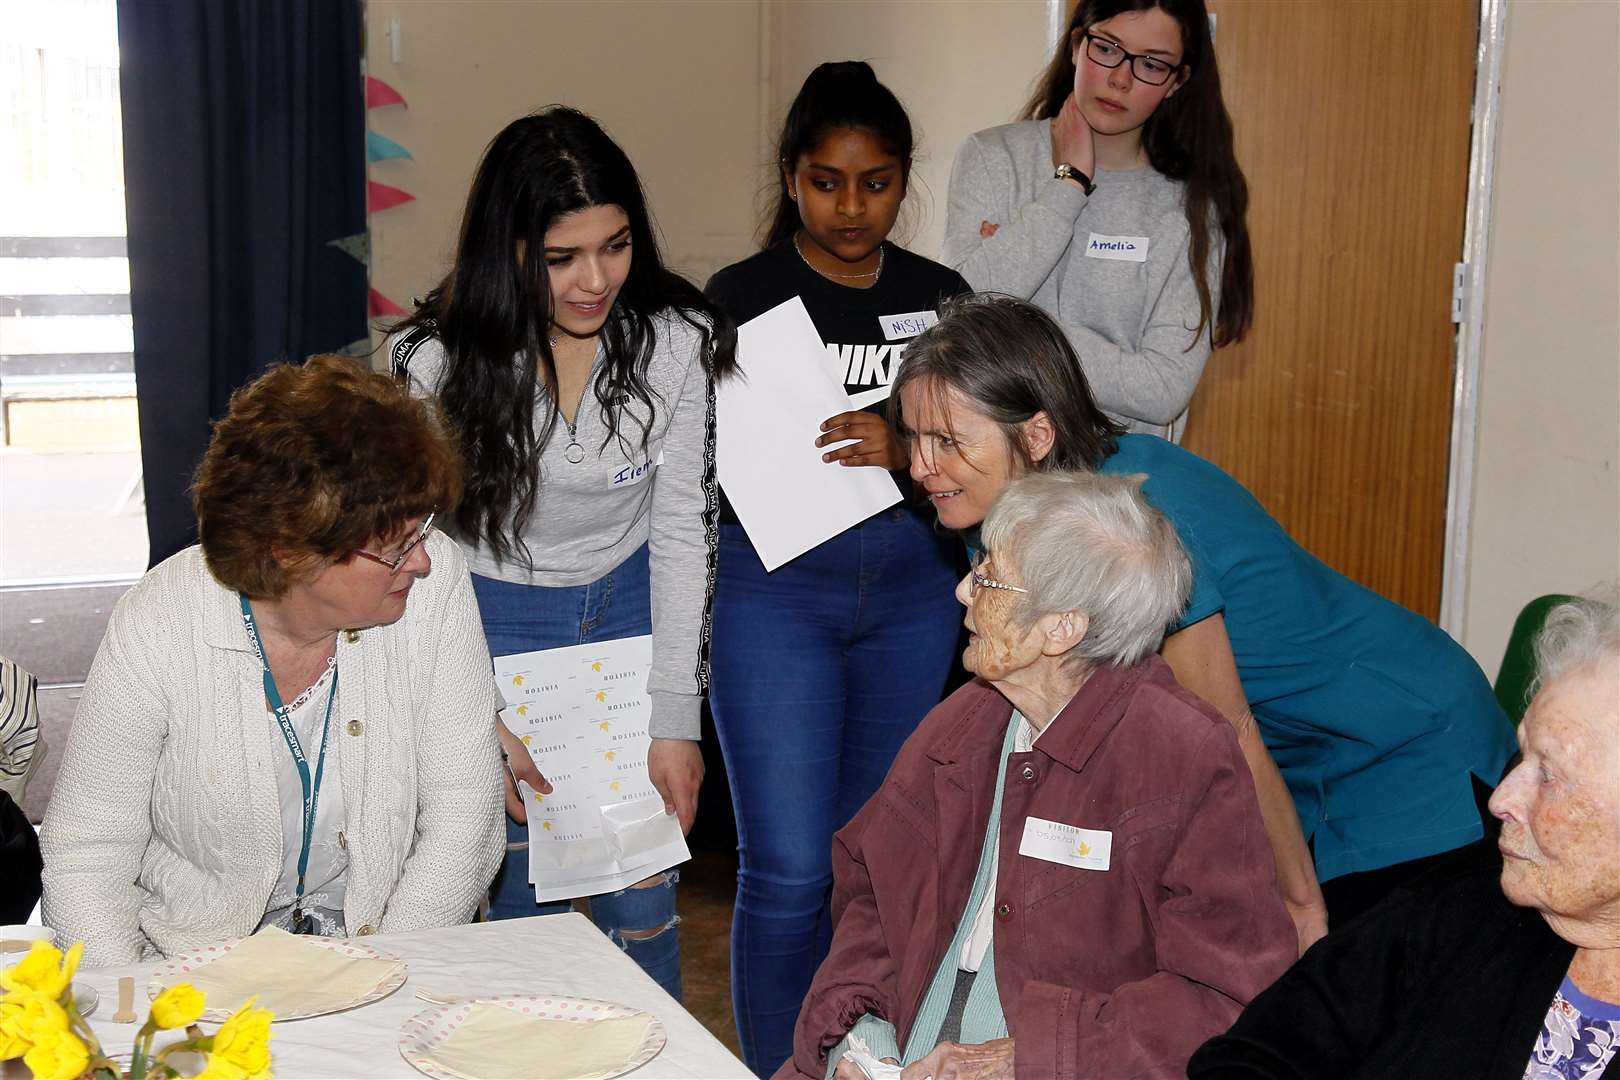 Maplesden Noakes Secondary School, hosting its first ever dementia cafe with year 10 pupils serving tea and cake to visitors. Picture: Sean Aidan (8312480)